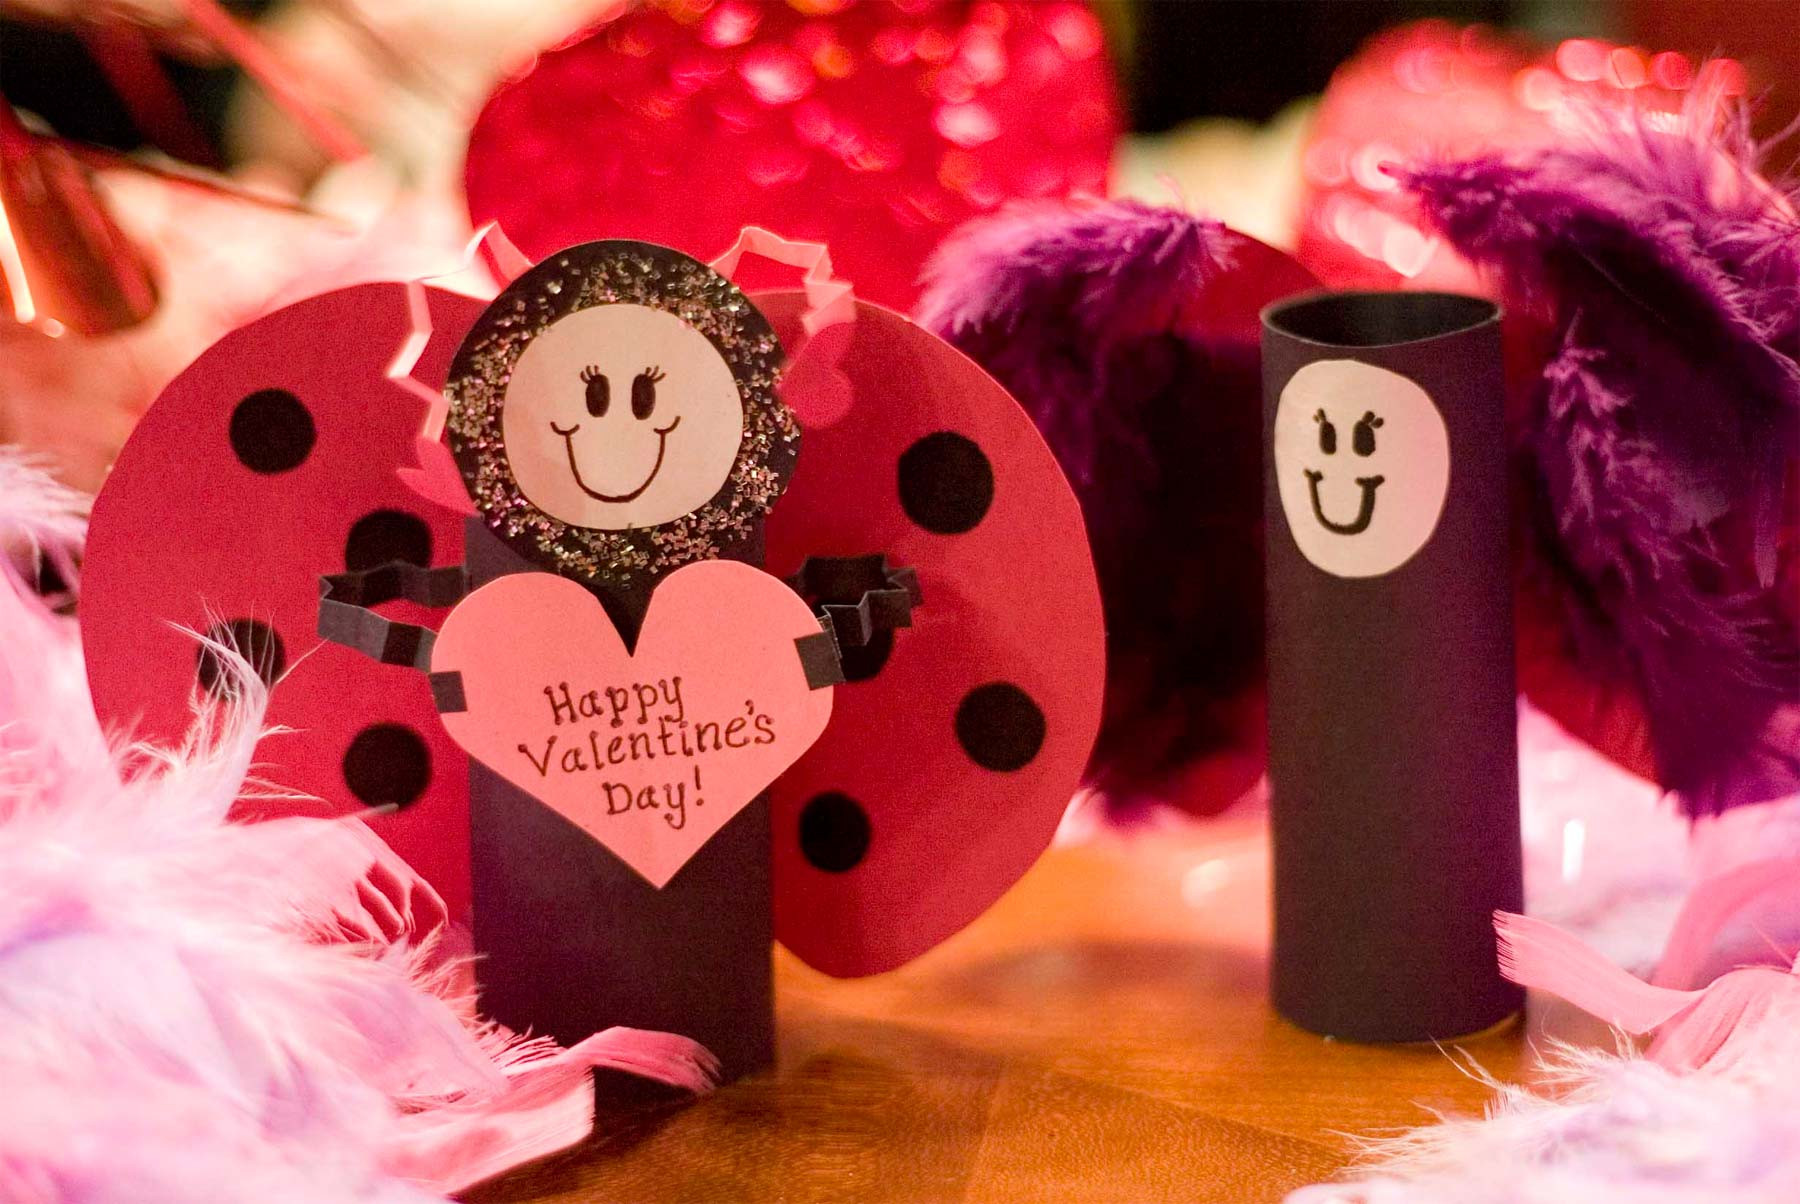 Top 10 Valentines Day Gifts For Her
 Top 10 Valentine s Day Gifts For Your Girlfriend